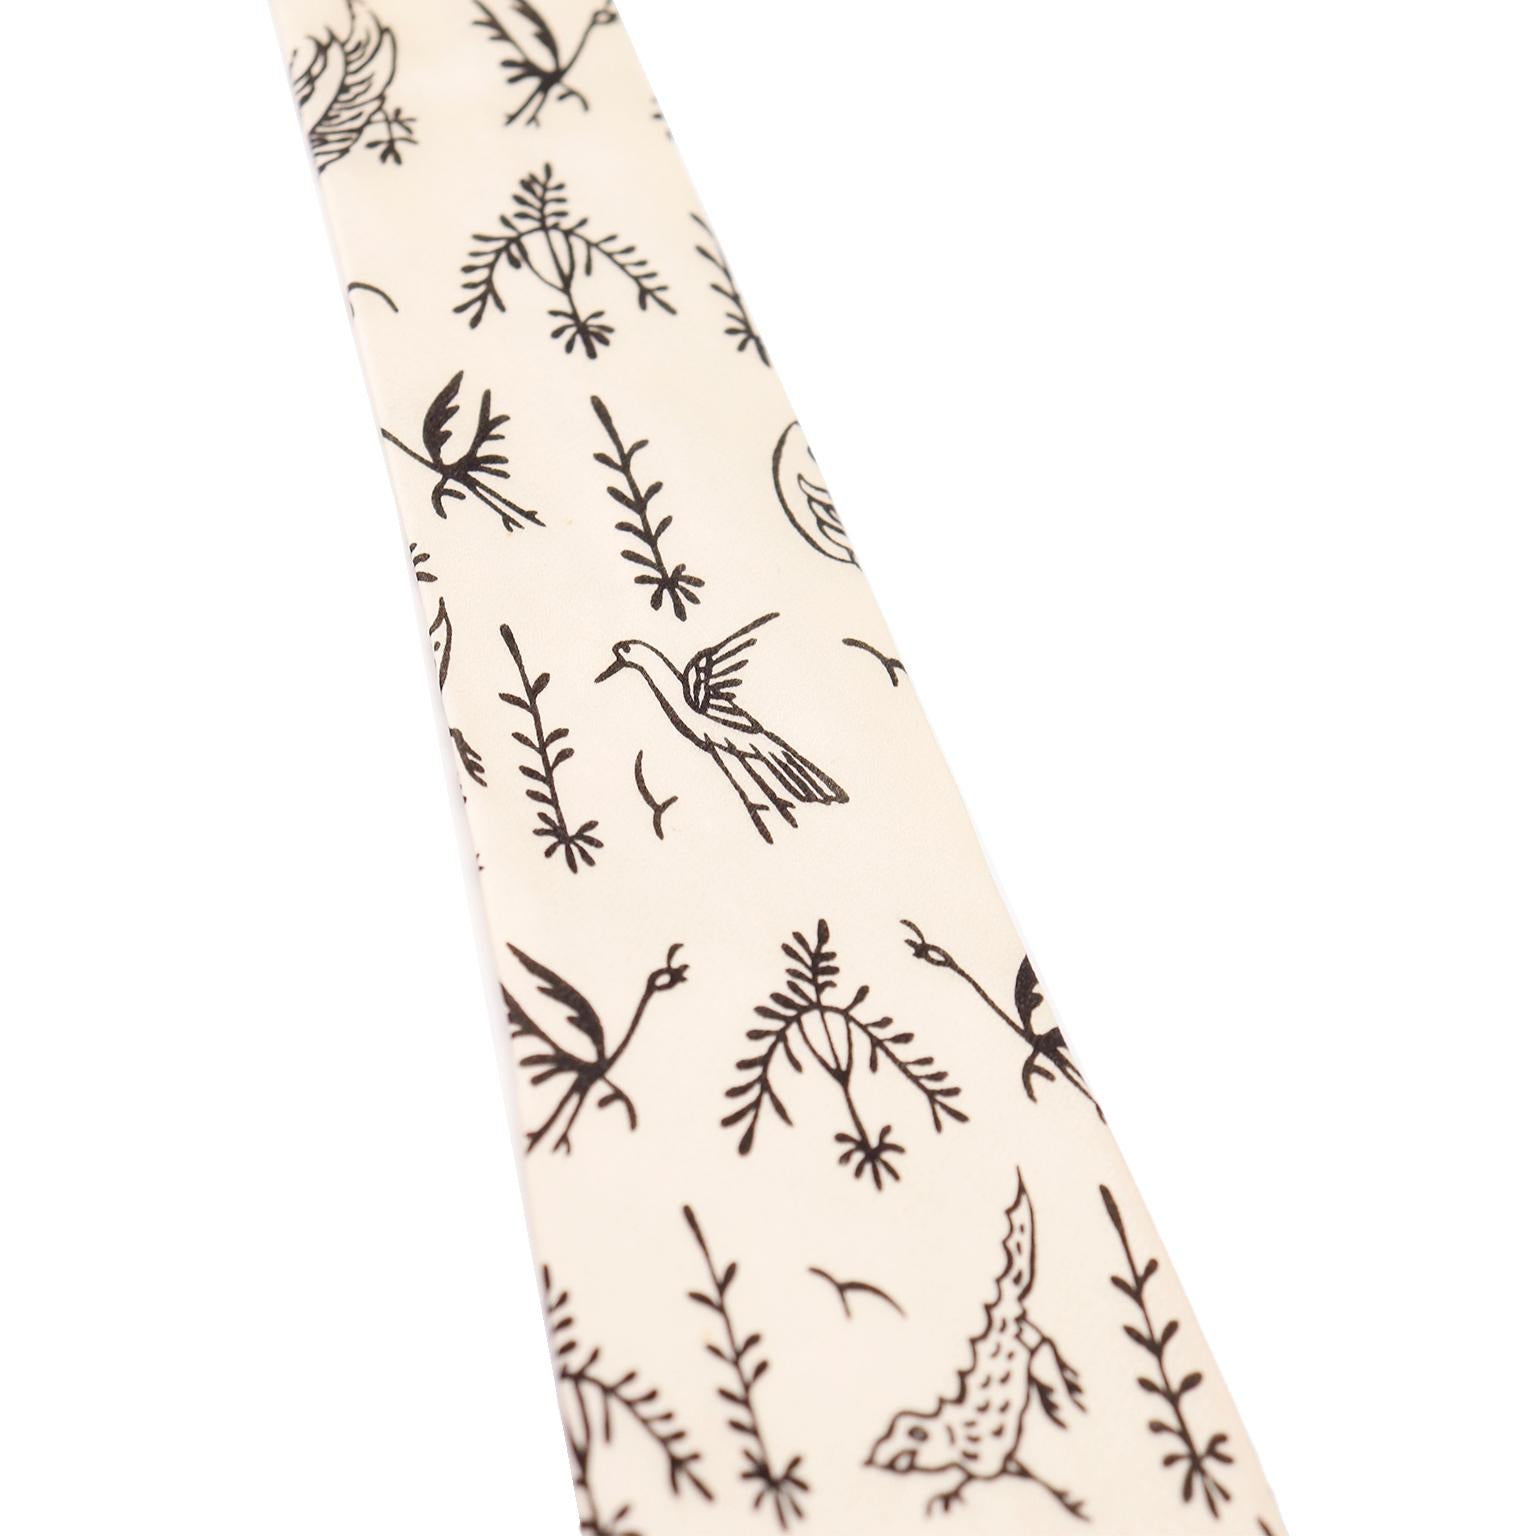 Yohji Yamamoto Pour Homme Rare Silk Tie Novelty Bird Lizard Abstract Necktie In Excellent Condition For Sale In Portland, OR